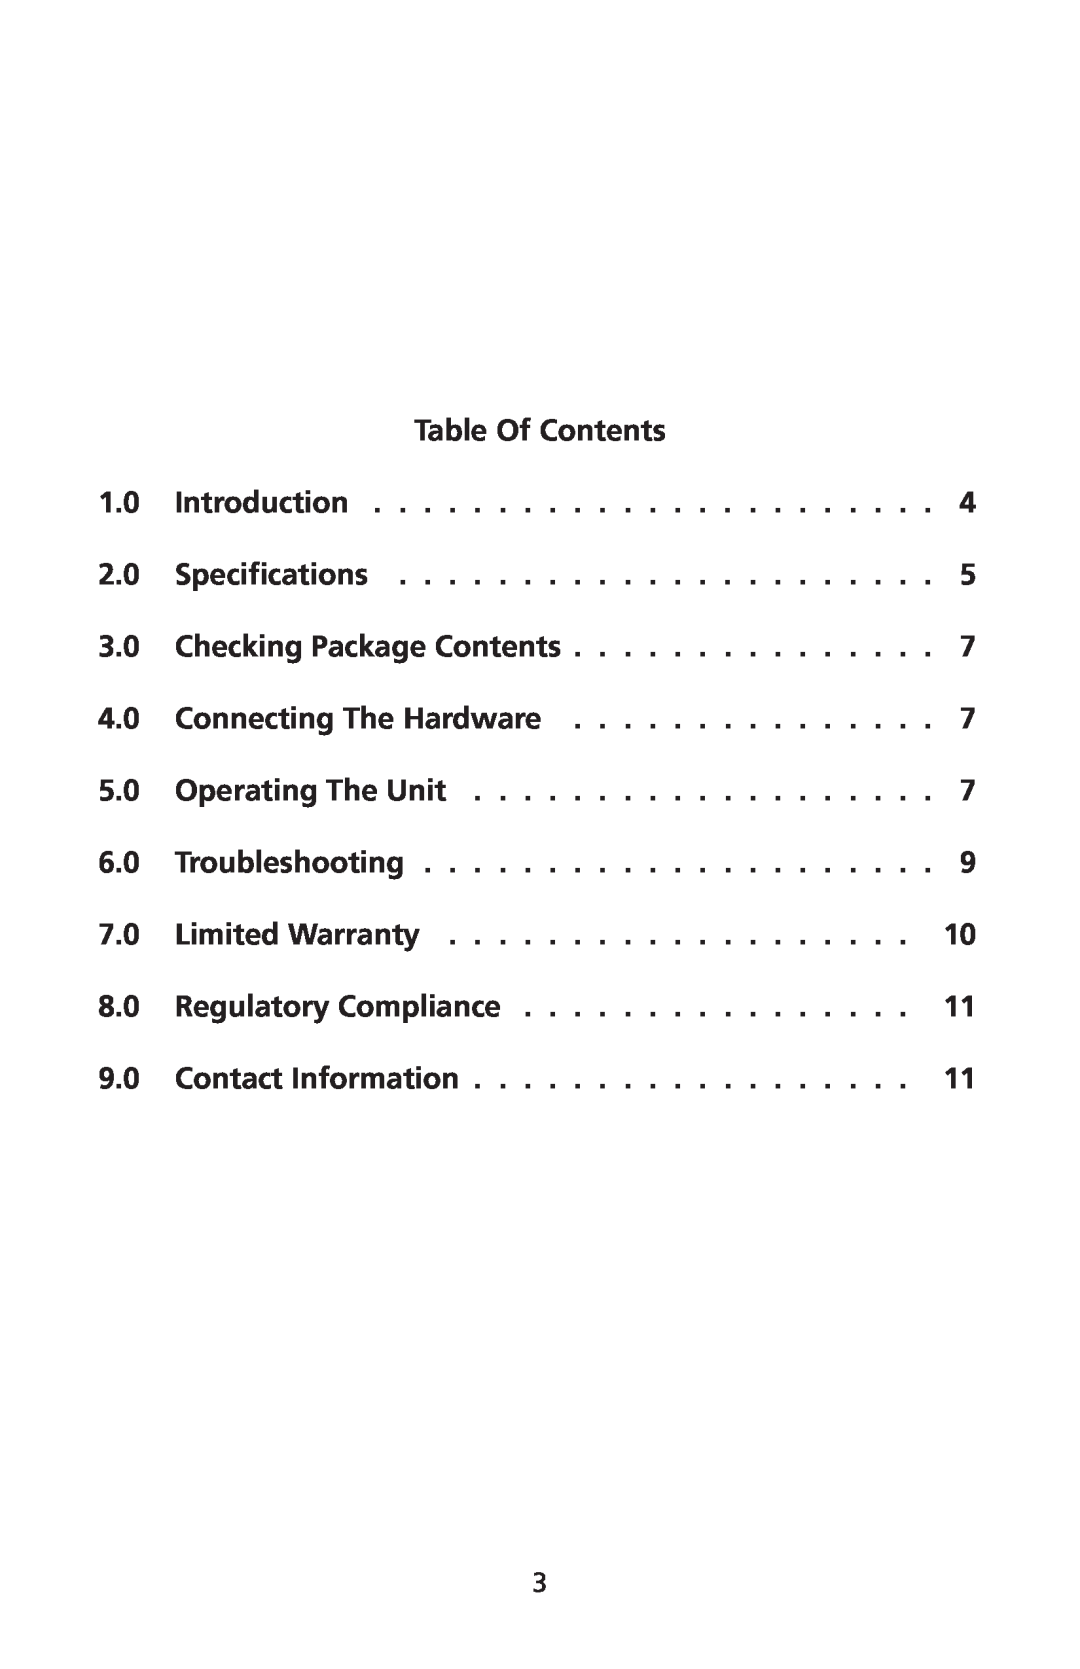 Audio Authority 1332 Table Of Contents, Introduction, Specifications, Checking Package Contents, Connecting The Hardware 